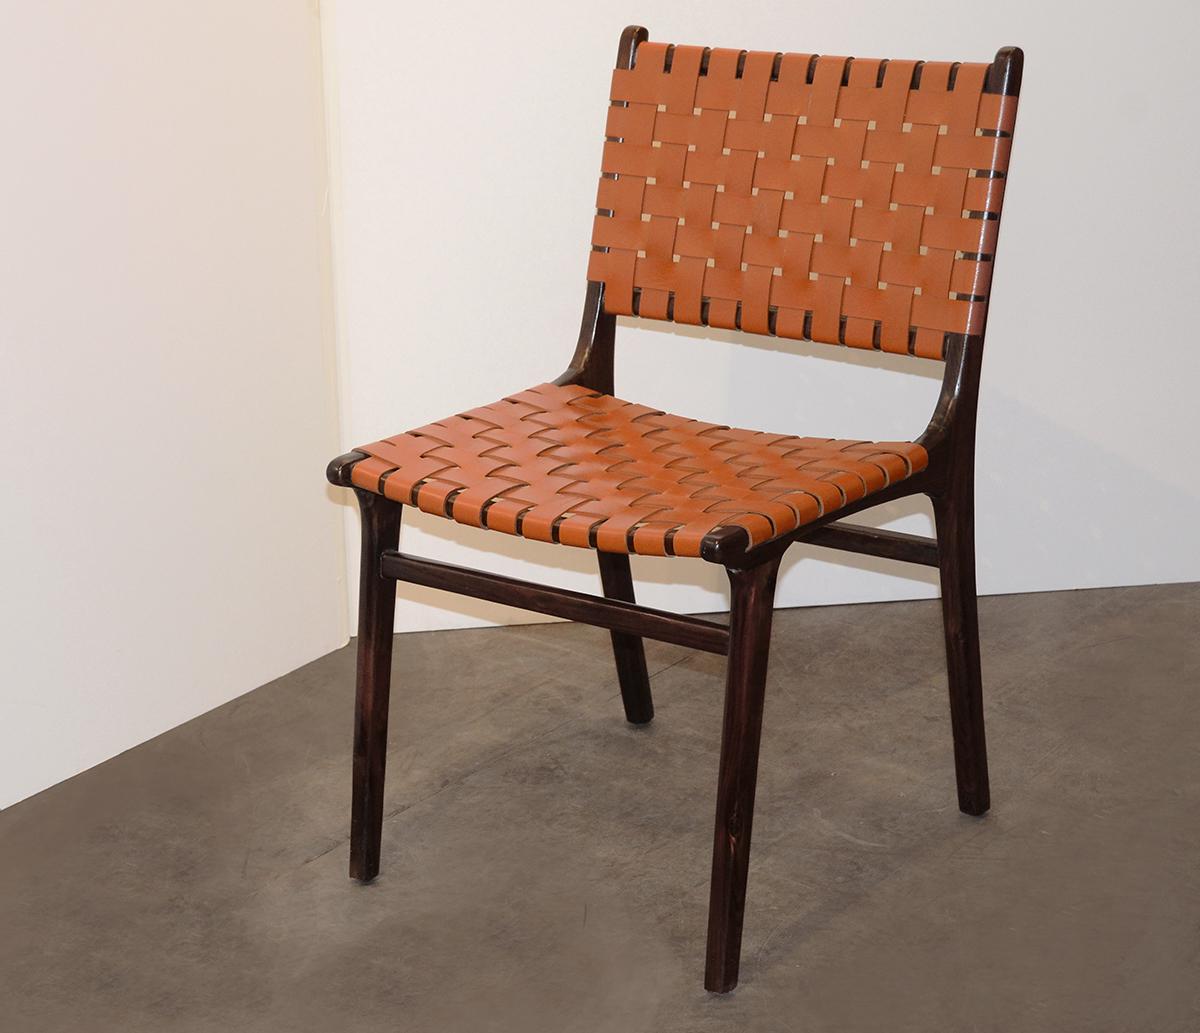 Organic Modern Andrianna Shamaris Modern Chair Series Single-Backed Leather Woven Chair For Sale